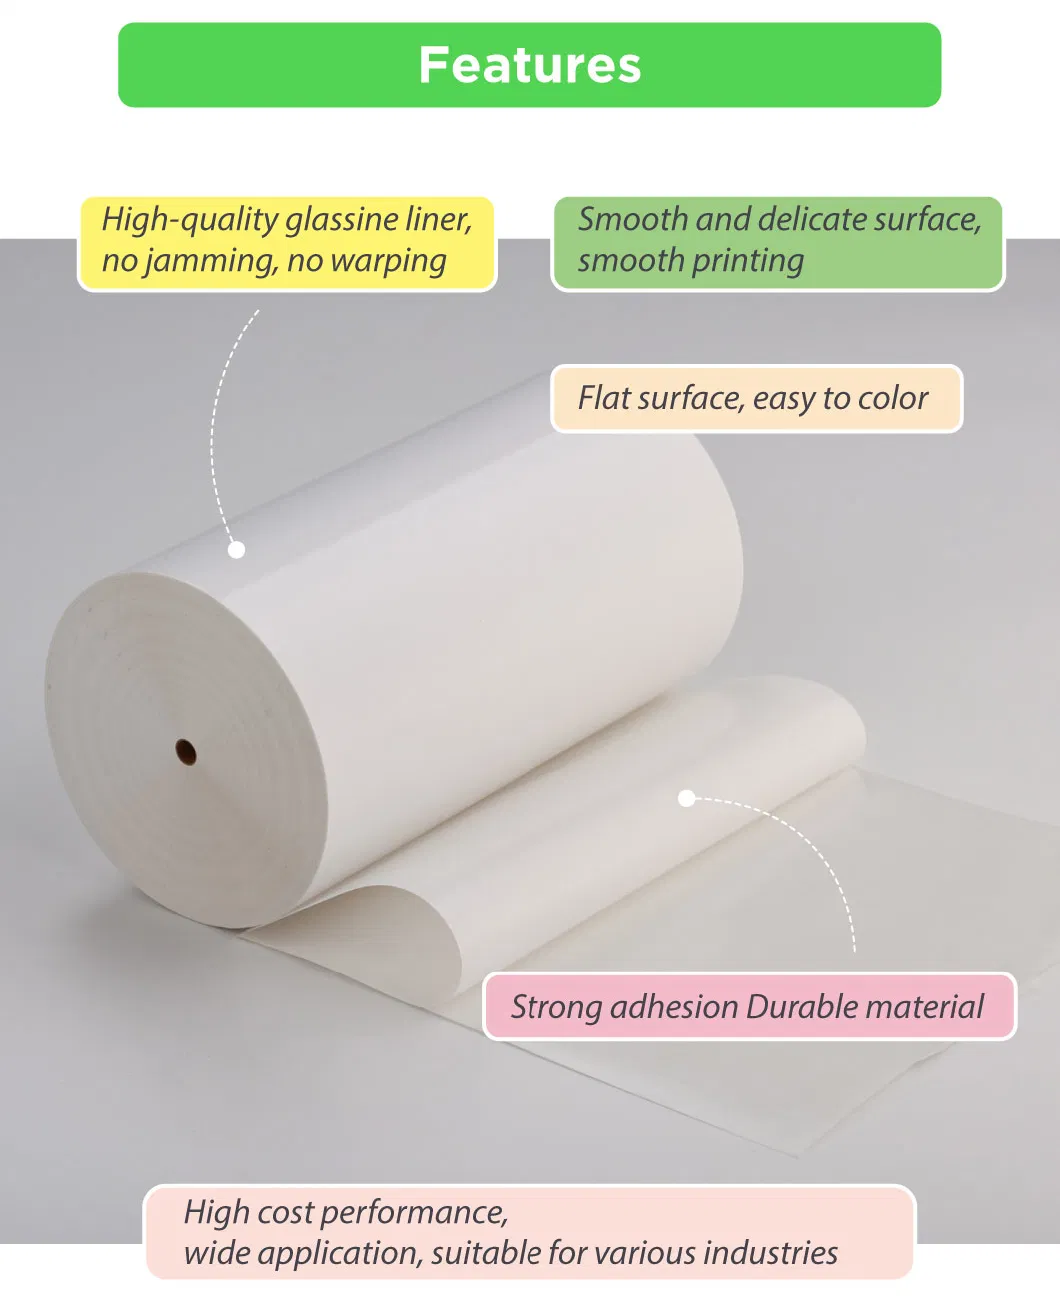 54gsm strong adhesive Rightint OEM Shanghai paper products flexography label